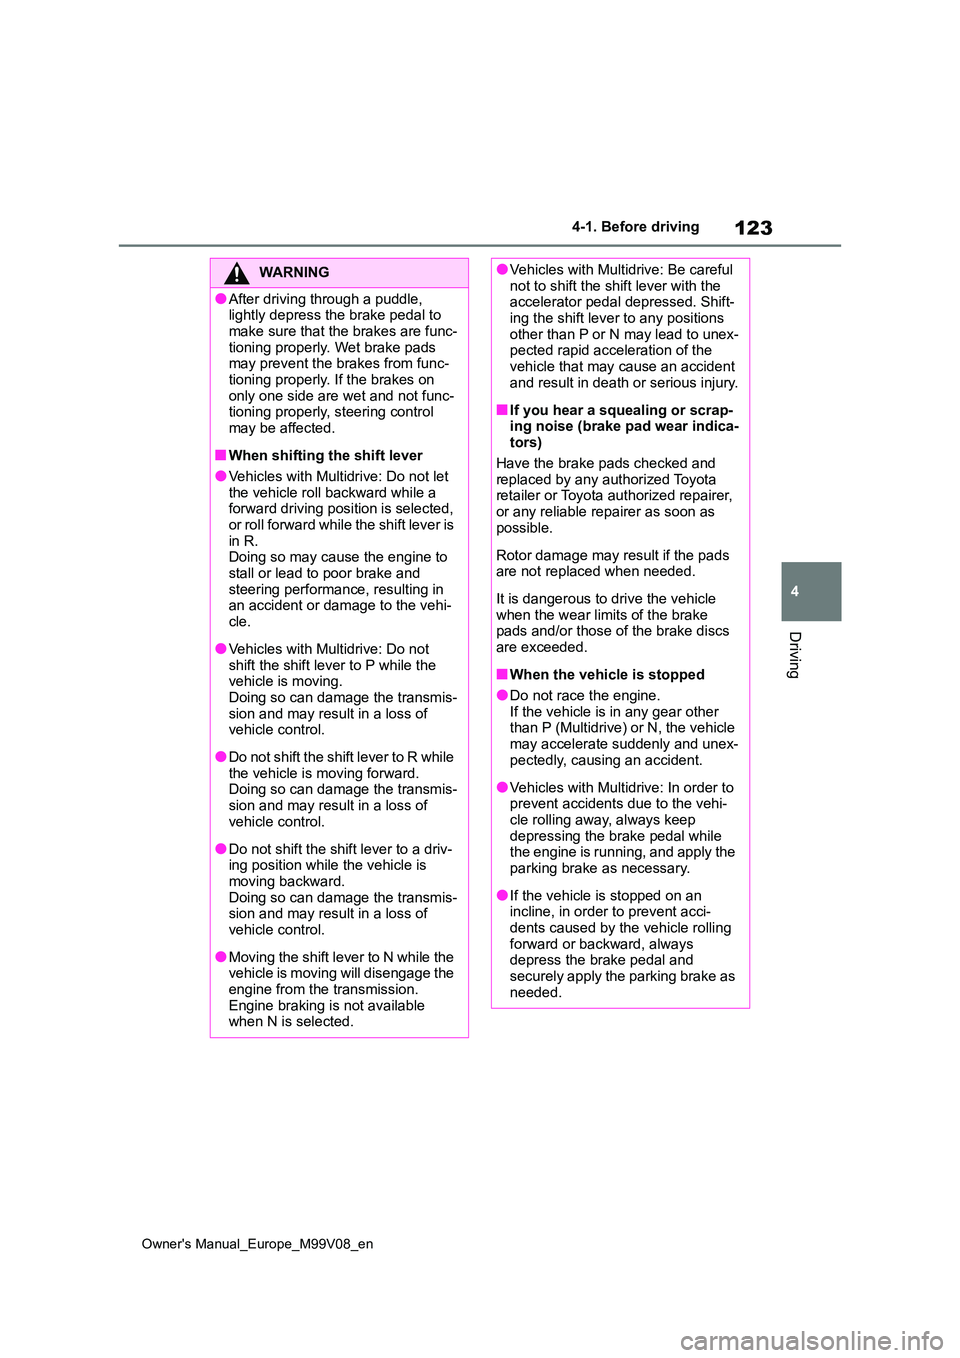 TOYOTA AYGO X 2022  Owners Manual (in English) 123
4
Owner's Manual_Europe_M99V08_en
4-1. Before driving
Driving
WARNING
●After driving through a puddle,  lightly depress the brake pedal to  
make sure that the brakes are func- tioning prope